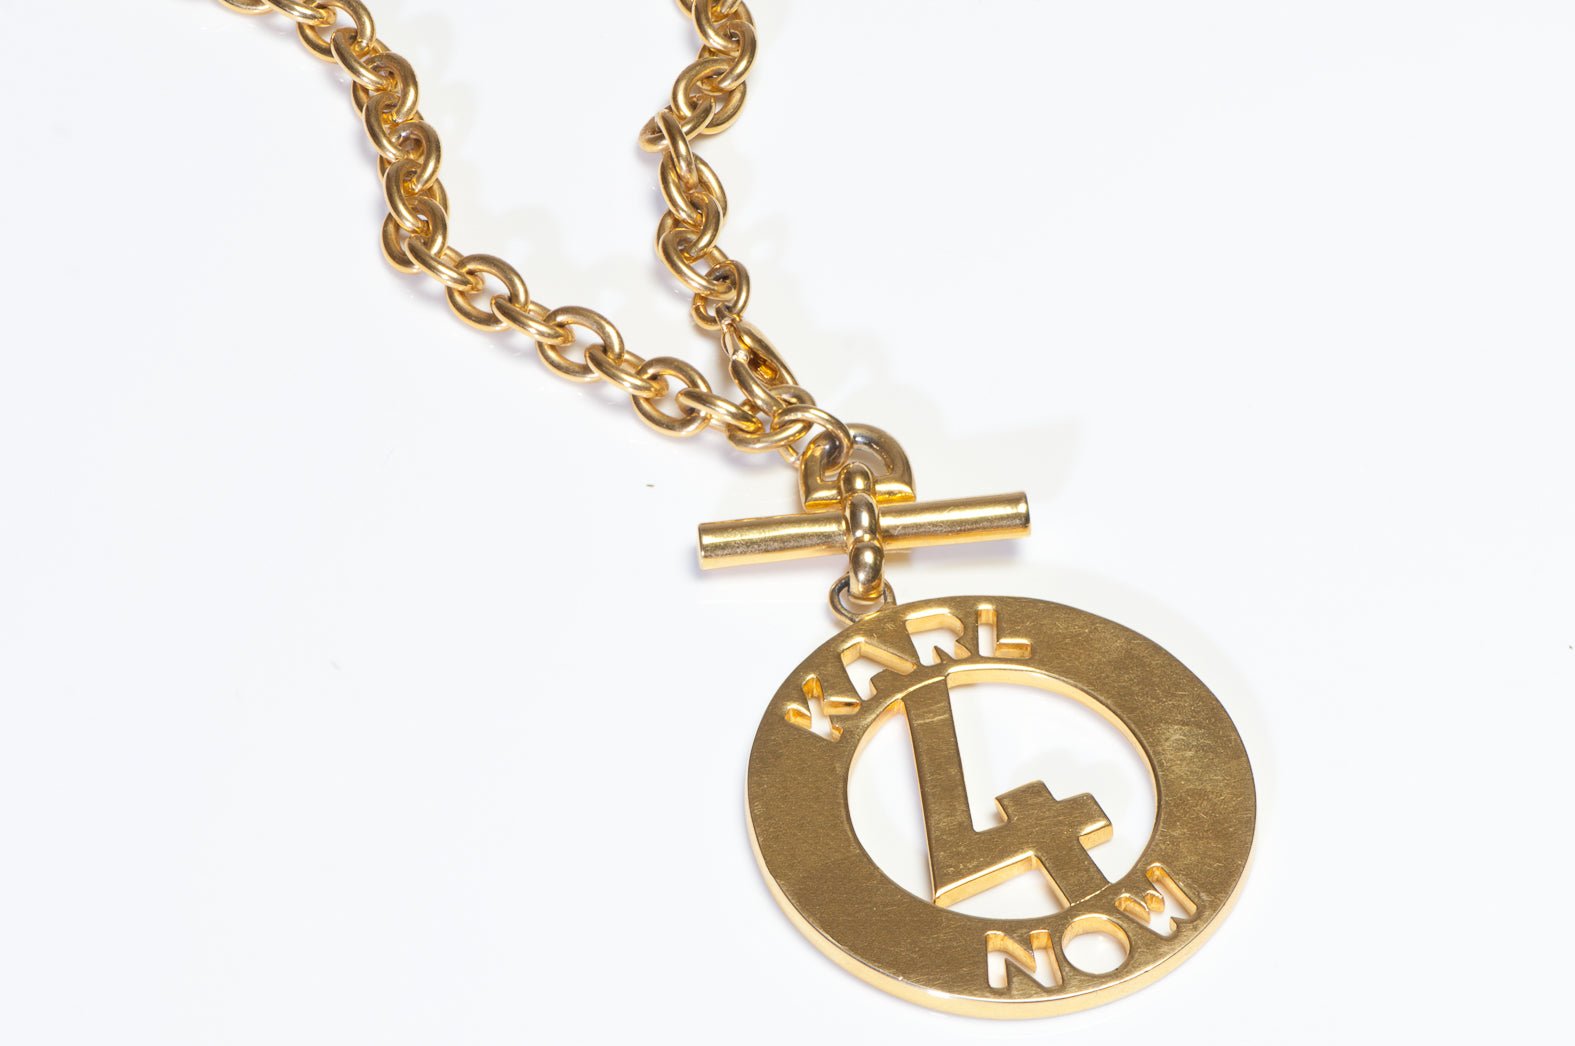 Vintage Karl Lagerfeld Paris Gold Plated Karl 4 Now Pendant Chain Necklace